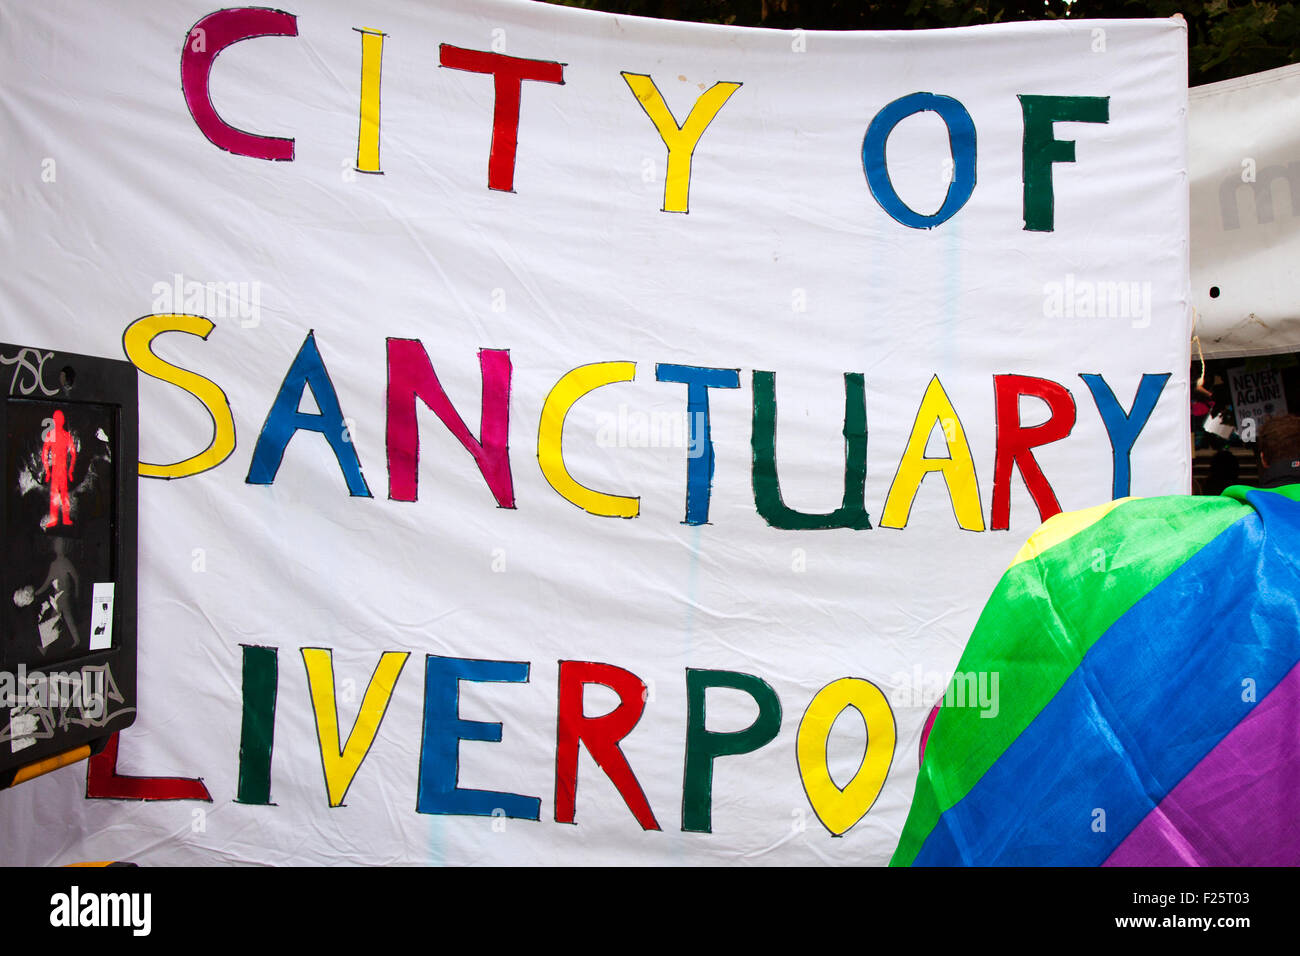 Hand-painted multi-coloured signs, welcome banners and Posters in Liverpool, Merseyside, UK 12th September 2015. Refugees Welcome Rally. A national day of action called in response to reports of refugees fleeing war, persecution, torture and poverty losing their lives or struggling to find a safe haven. The national day of action is sponsored by Stop the War Coalition, Solidarity With Refugees, Stand up to Racism, BARAC, Migrant Rights Network, People's Assembly, War on Want, Movement Against Xenophobia, Love Music Hate Racism. supporting asylum seekers' march in the city centre. Stock Photo